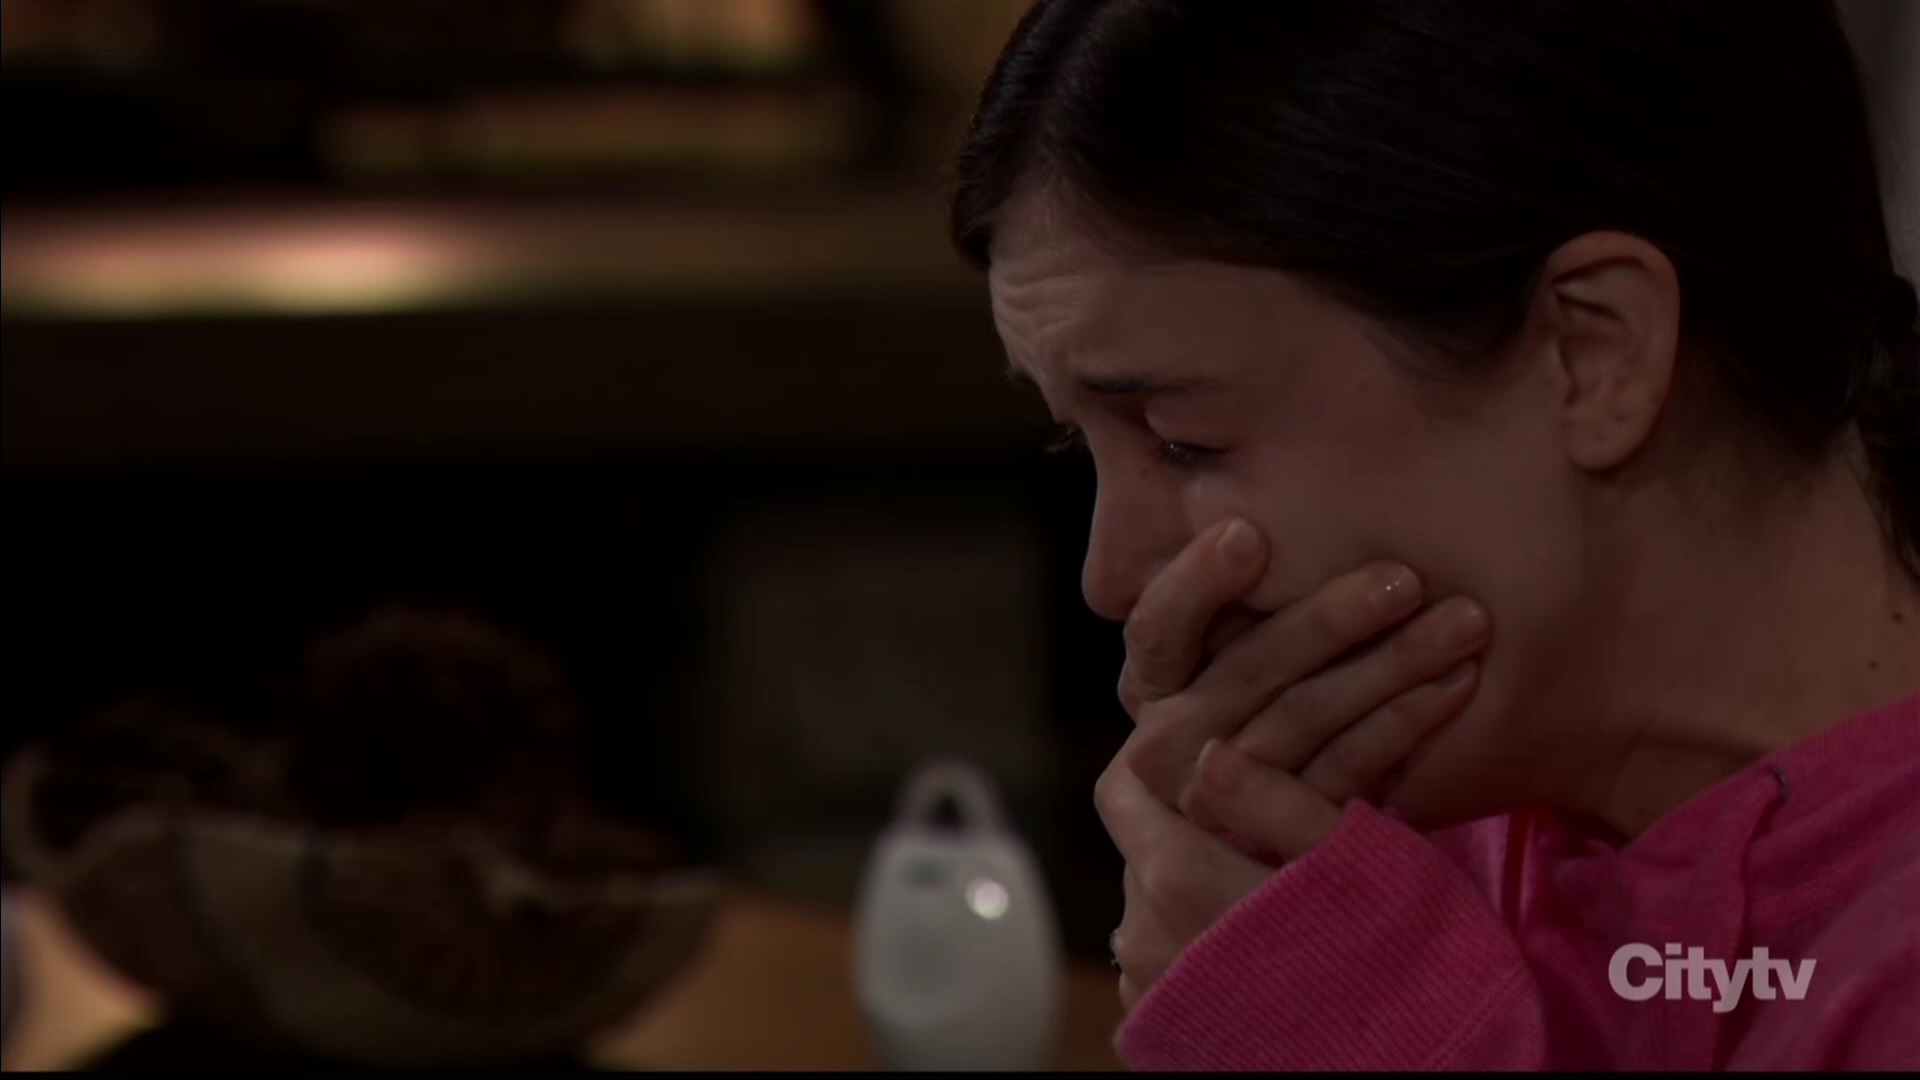 willow sobs because she might die